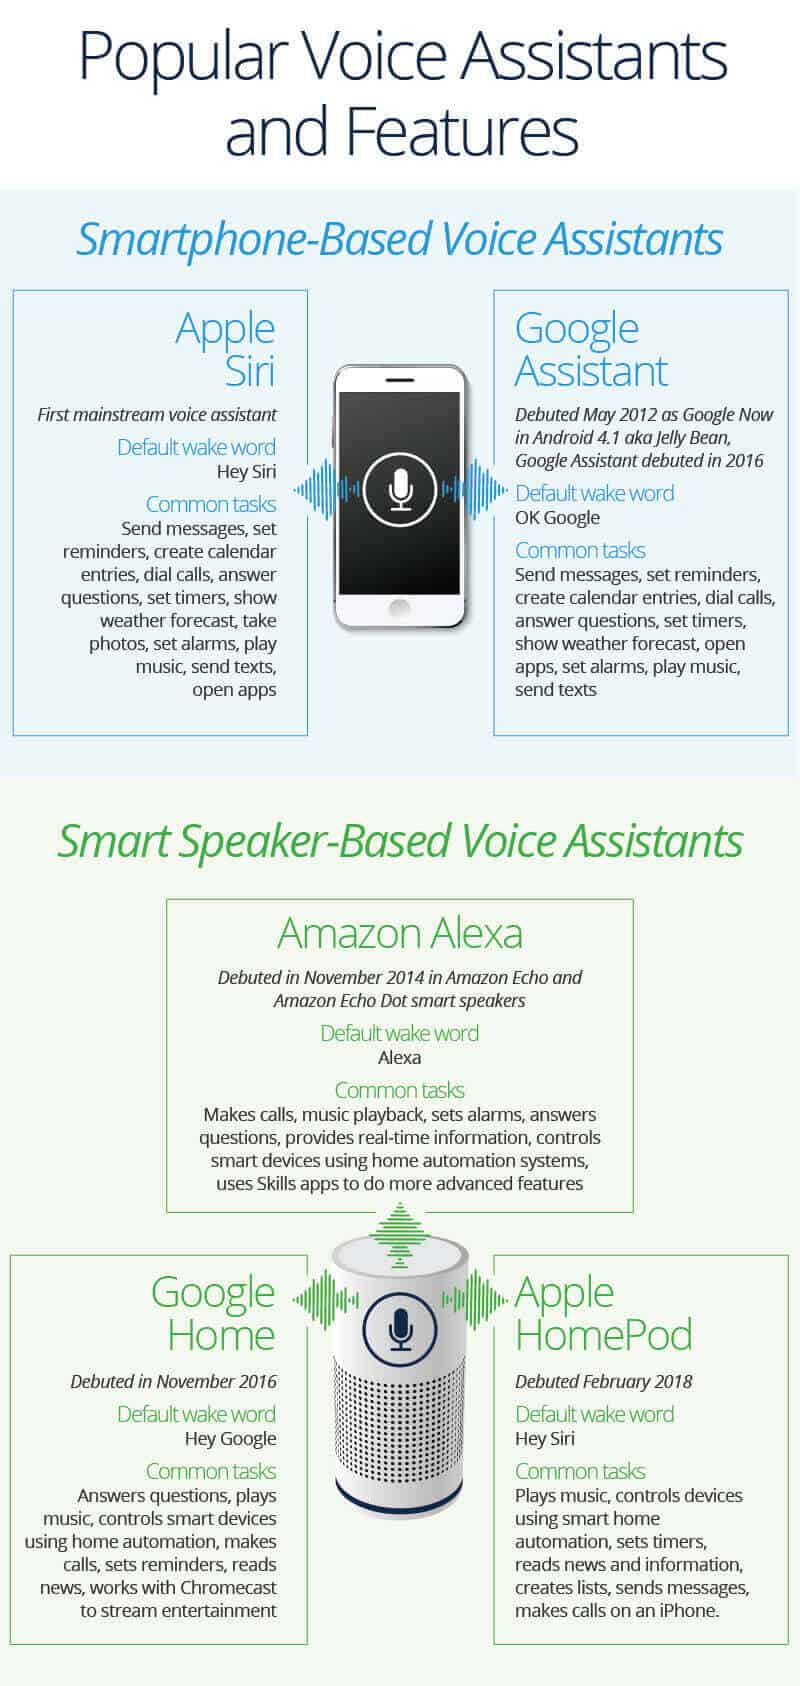 Popular Voice Assistants and Features